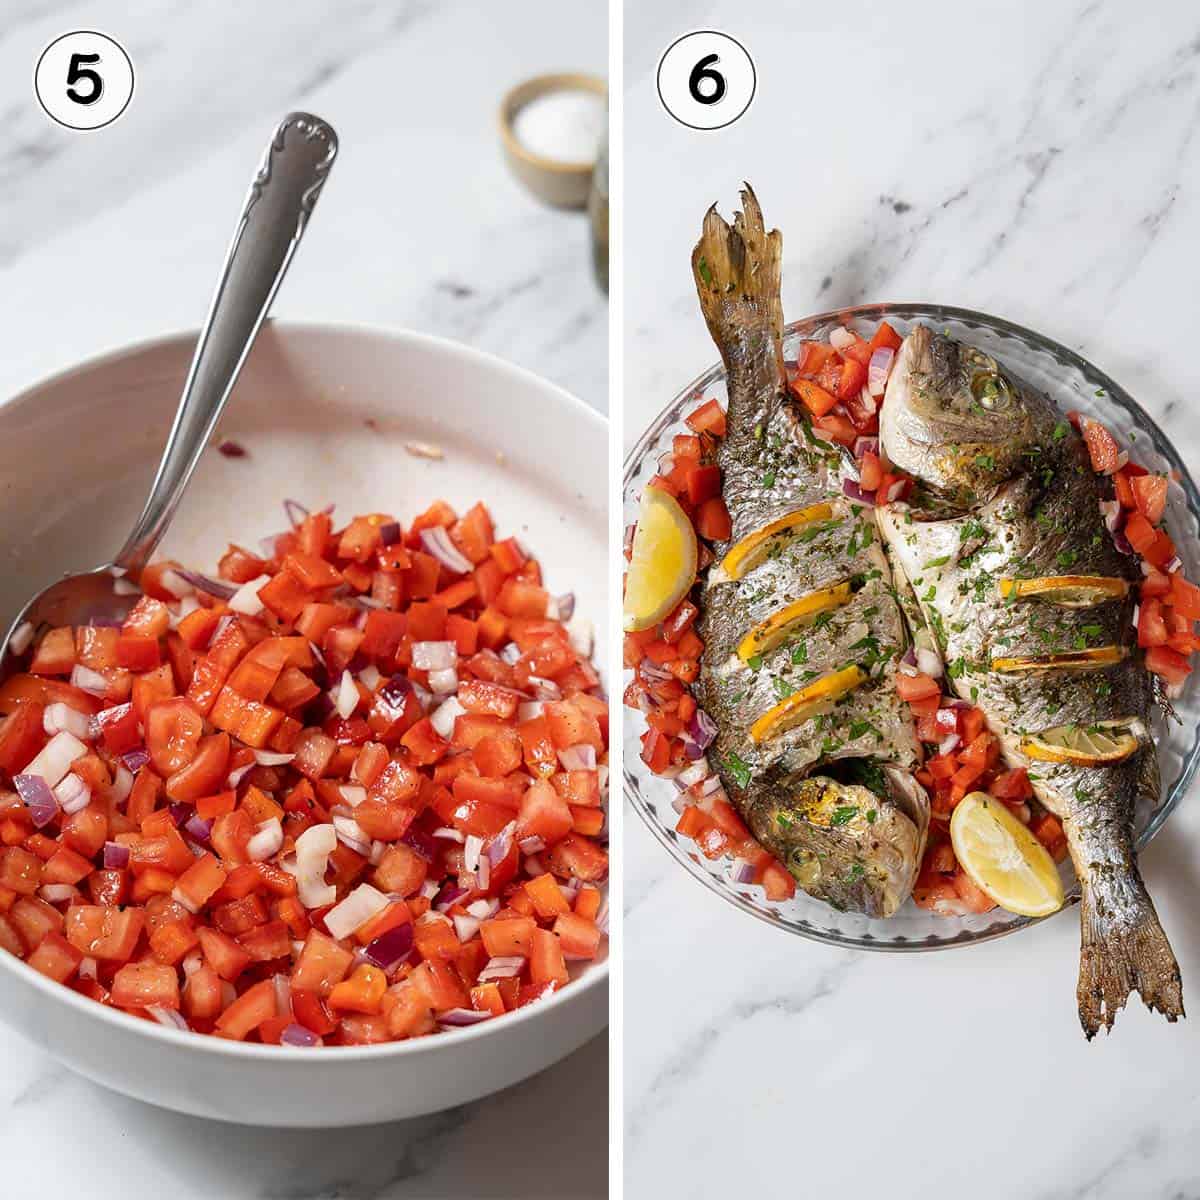 mixing up the tomato salad and serving the bream.